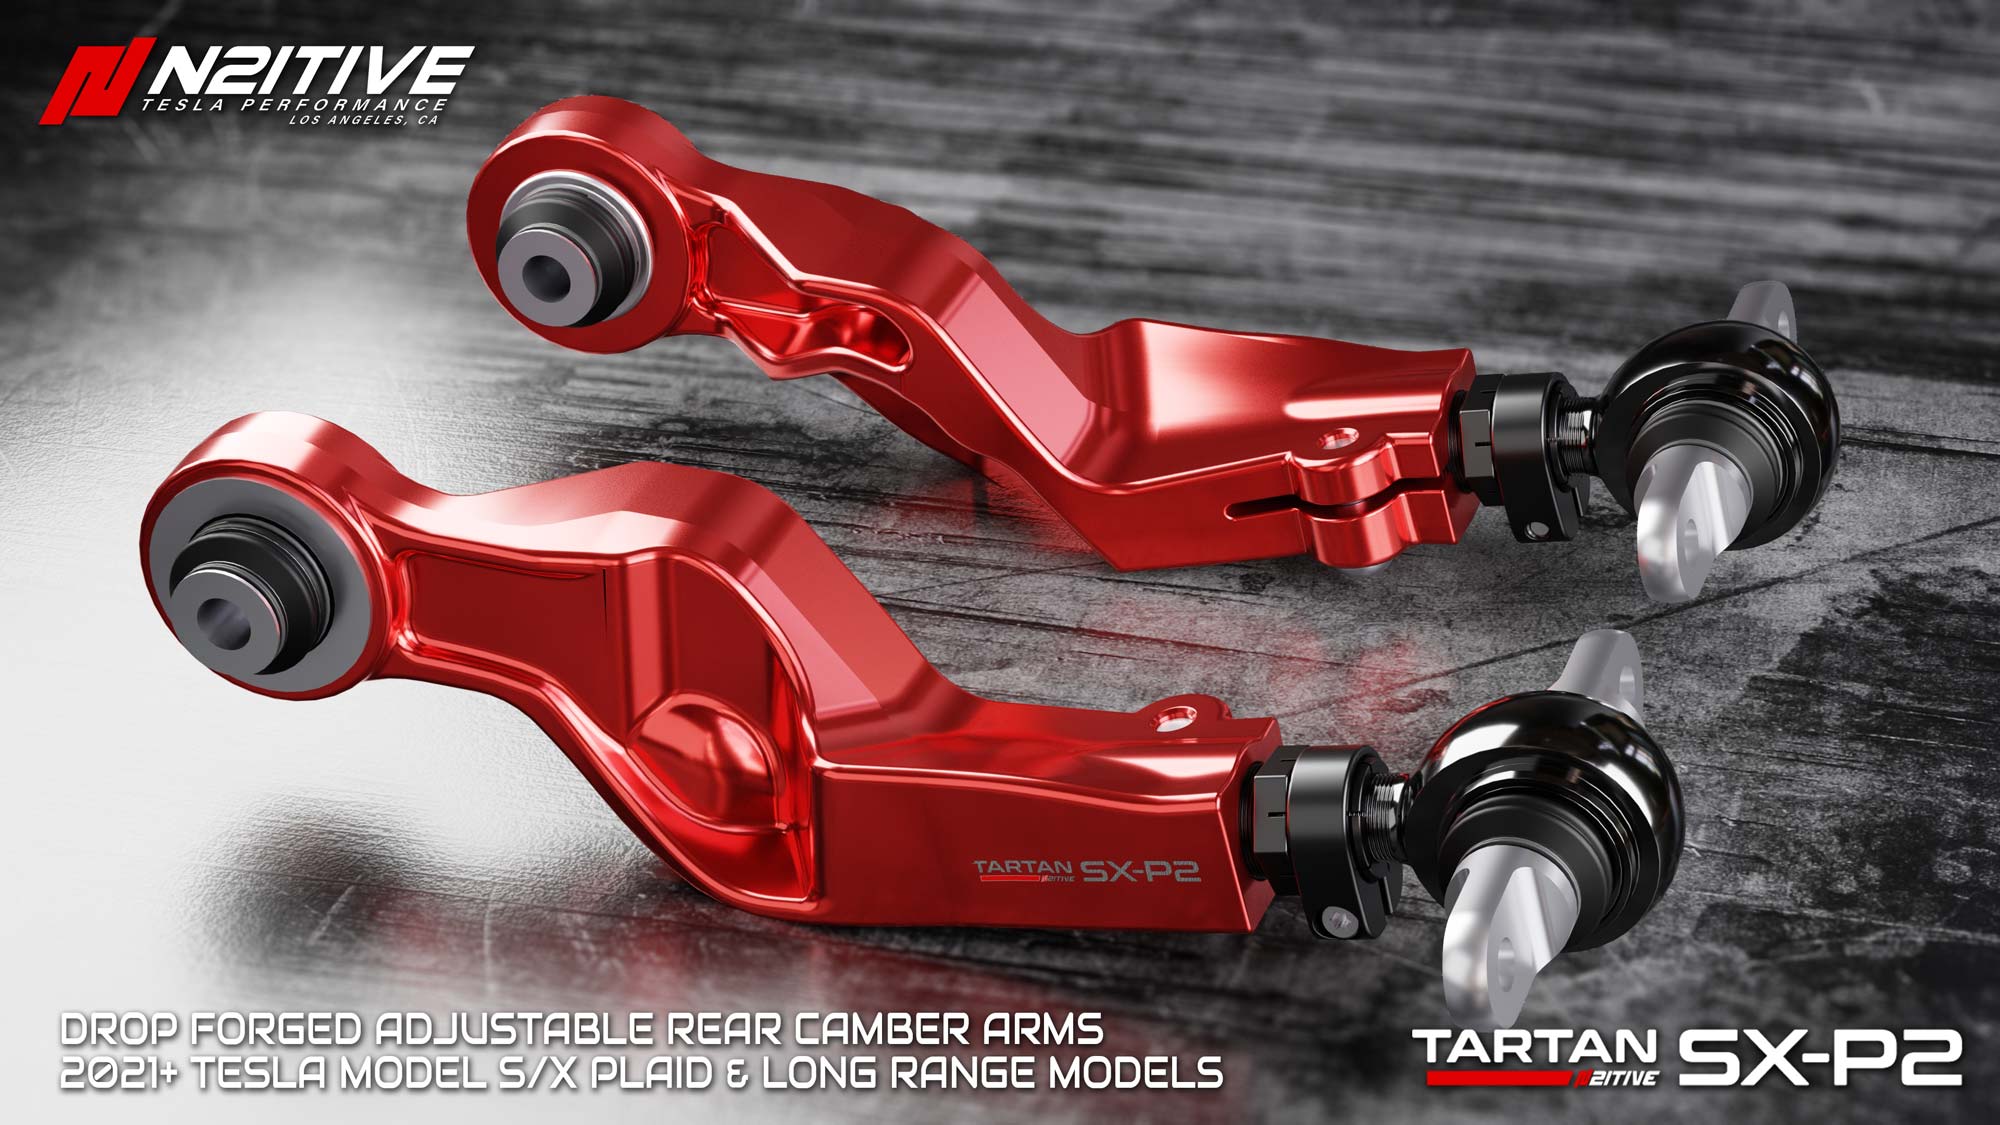 N2itive TARTAN SX-P2 2021+ Tesla Model S/X PLAID & Long Range Forged Adjustable Rear Upper Camber Arms (1 PAIR)